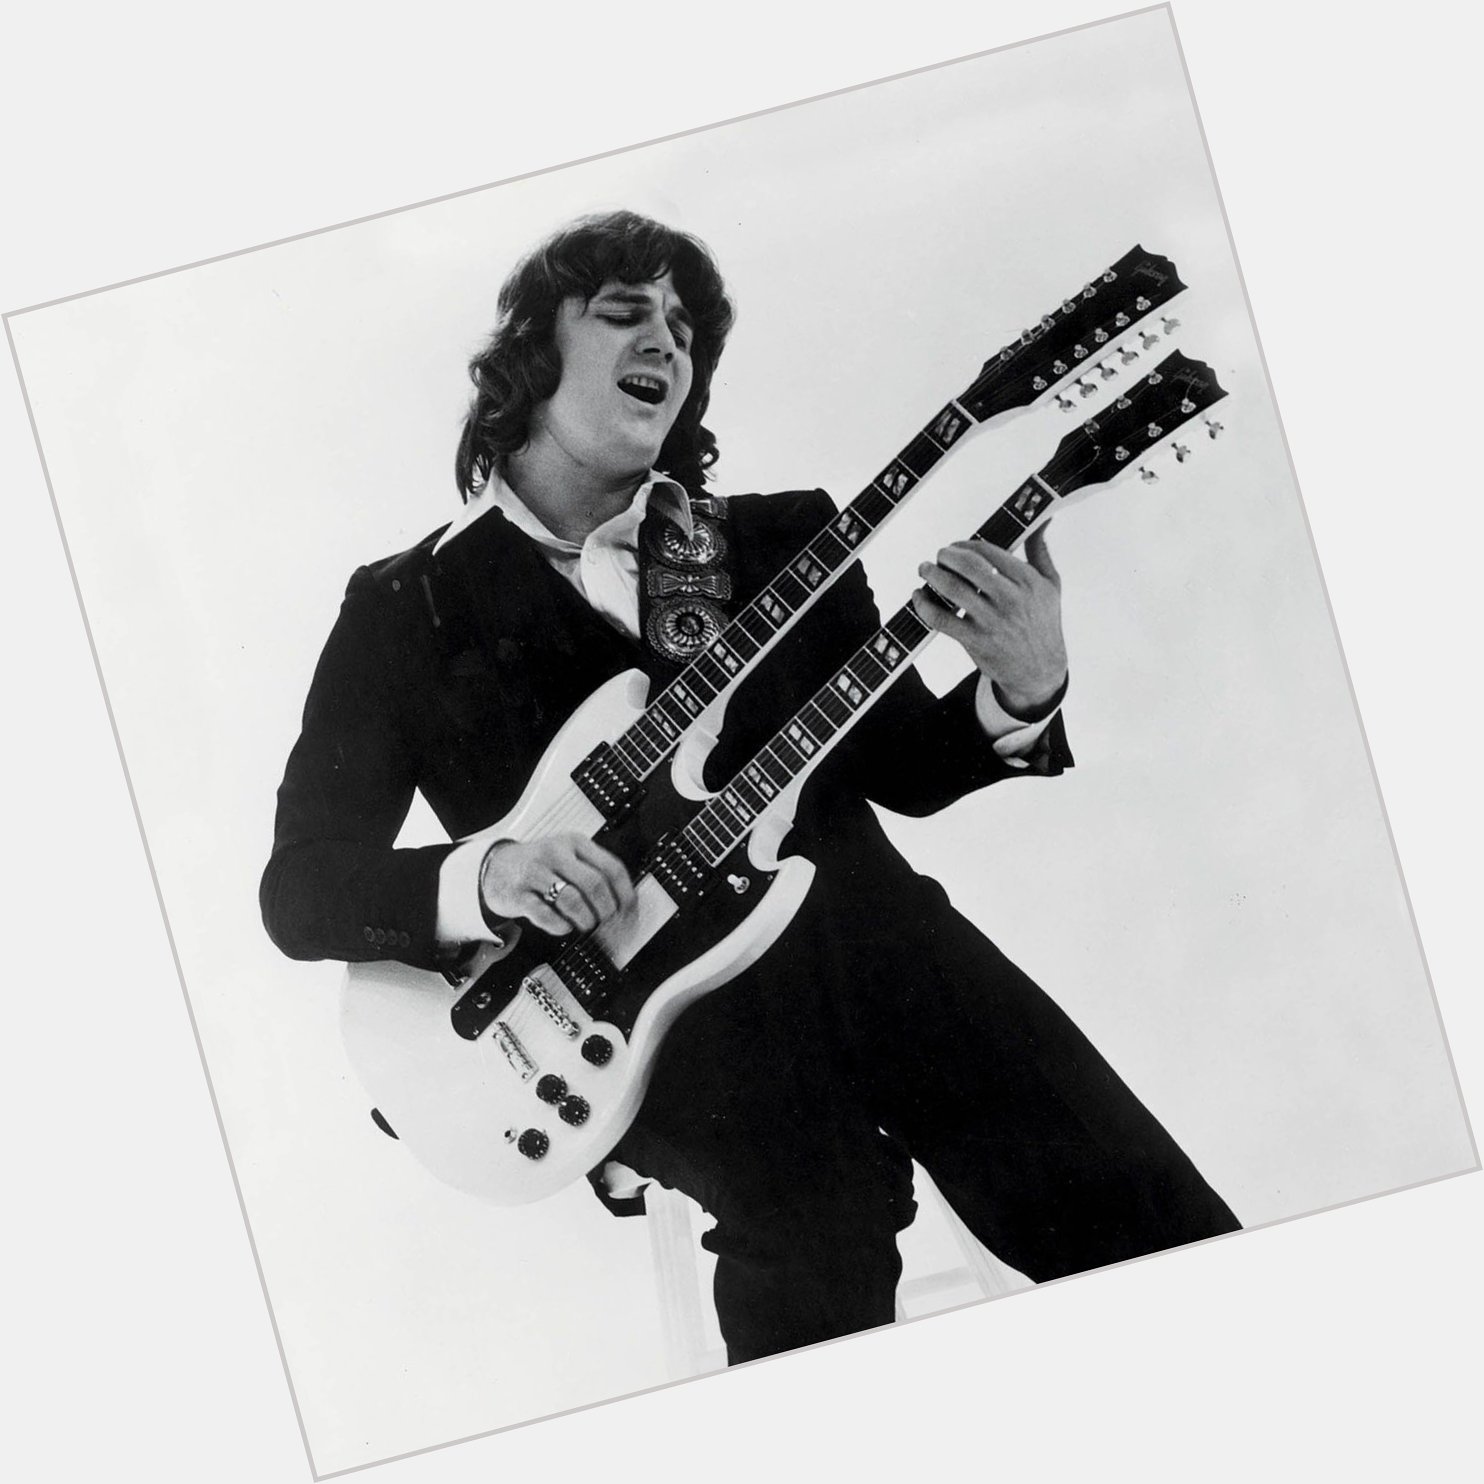 I want to say Happy Birthday to Steve Miller his B-day  was the 5th of Oct. 